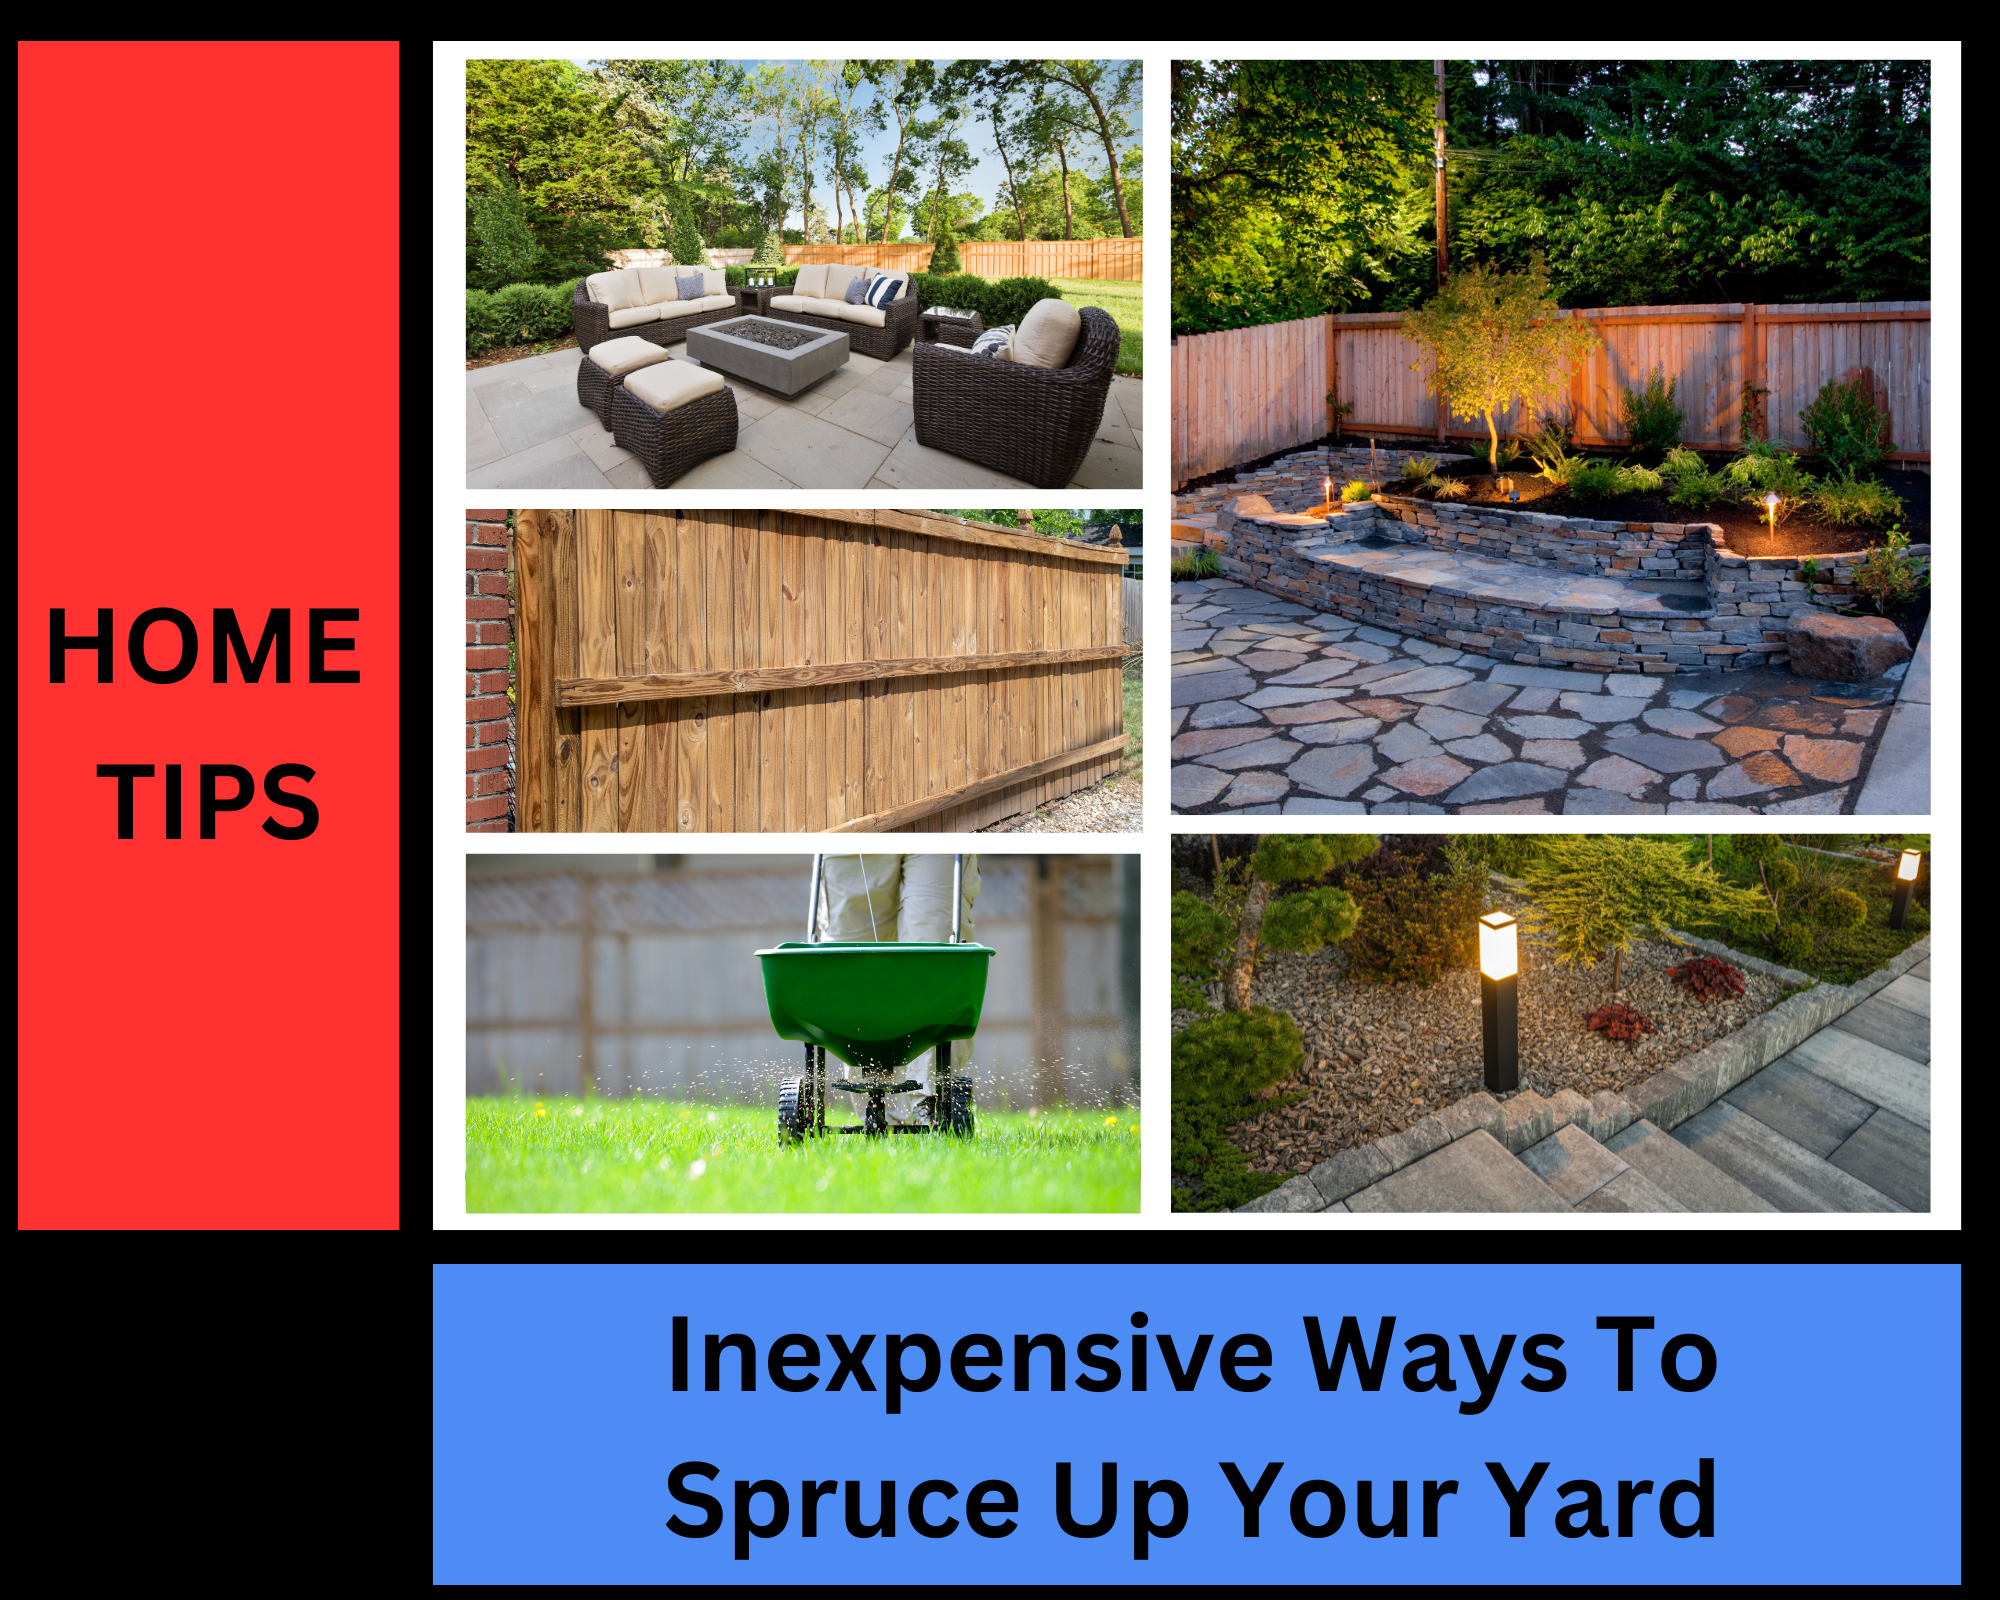 Ways to Spruce Up Your Yard